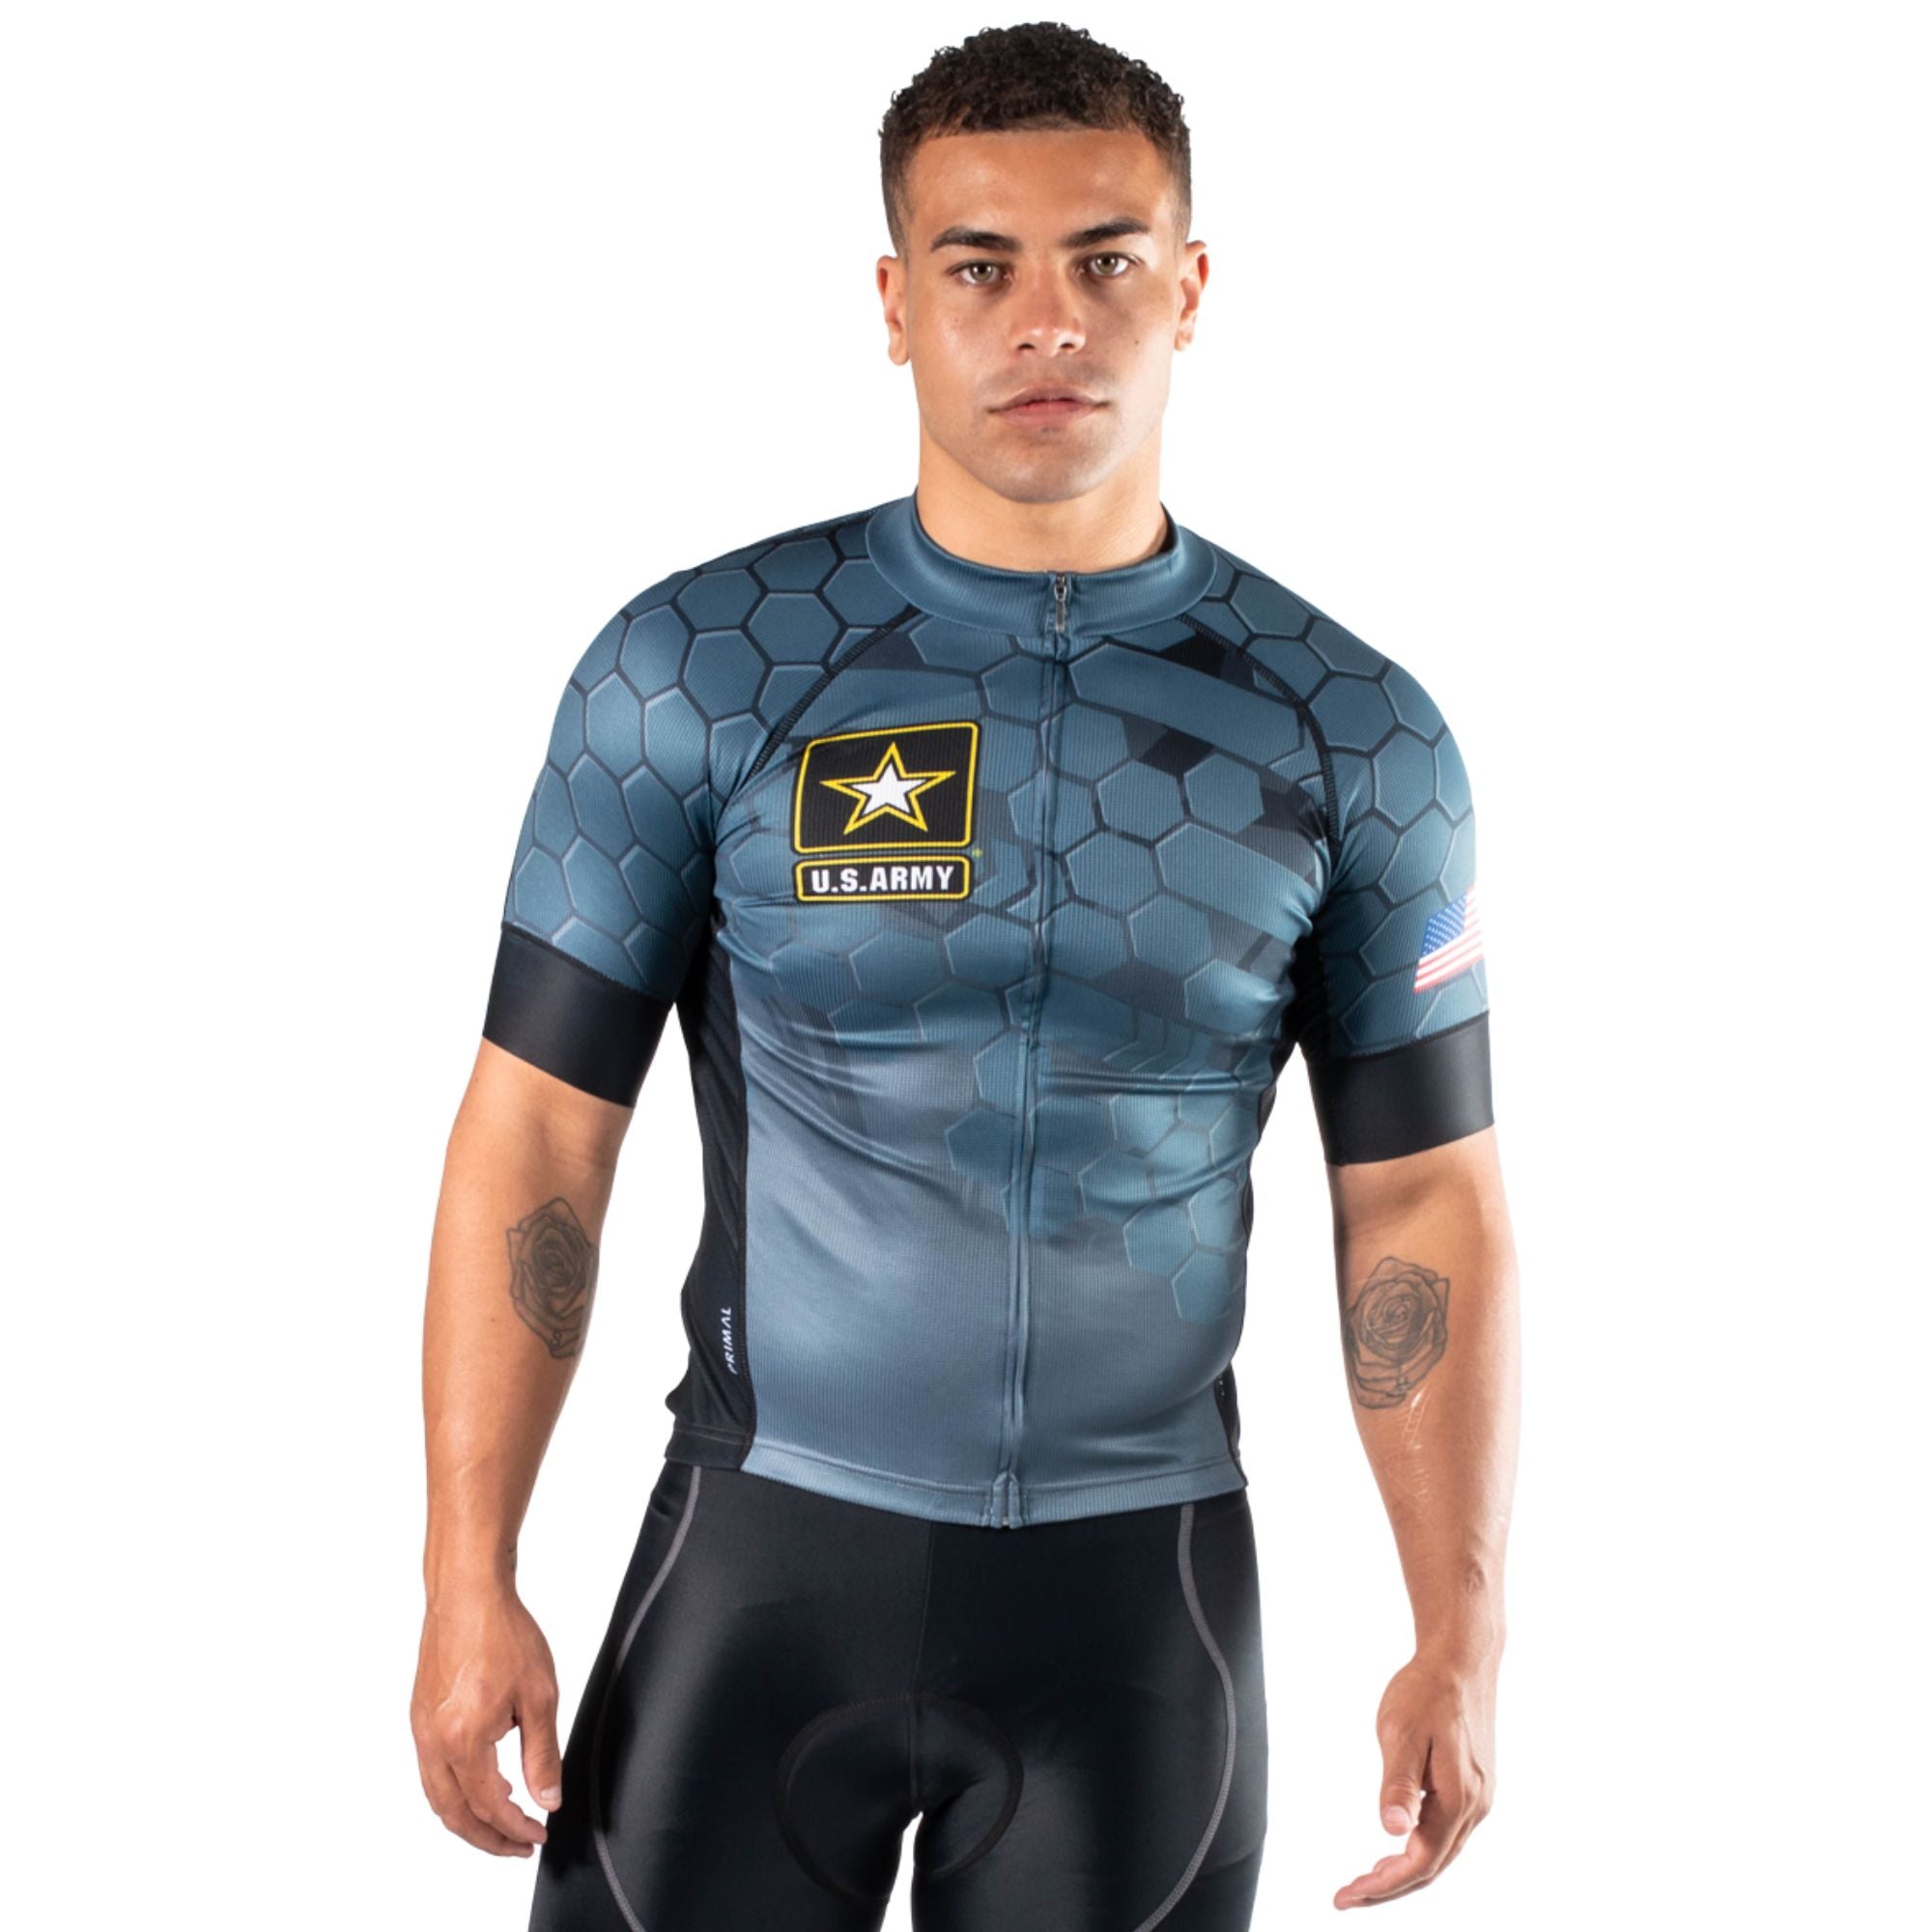 Men's Army Camouflage Cycling Jersey